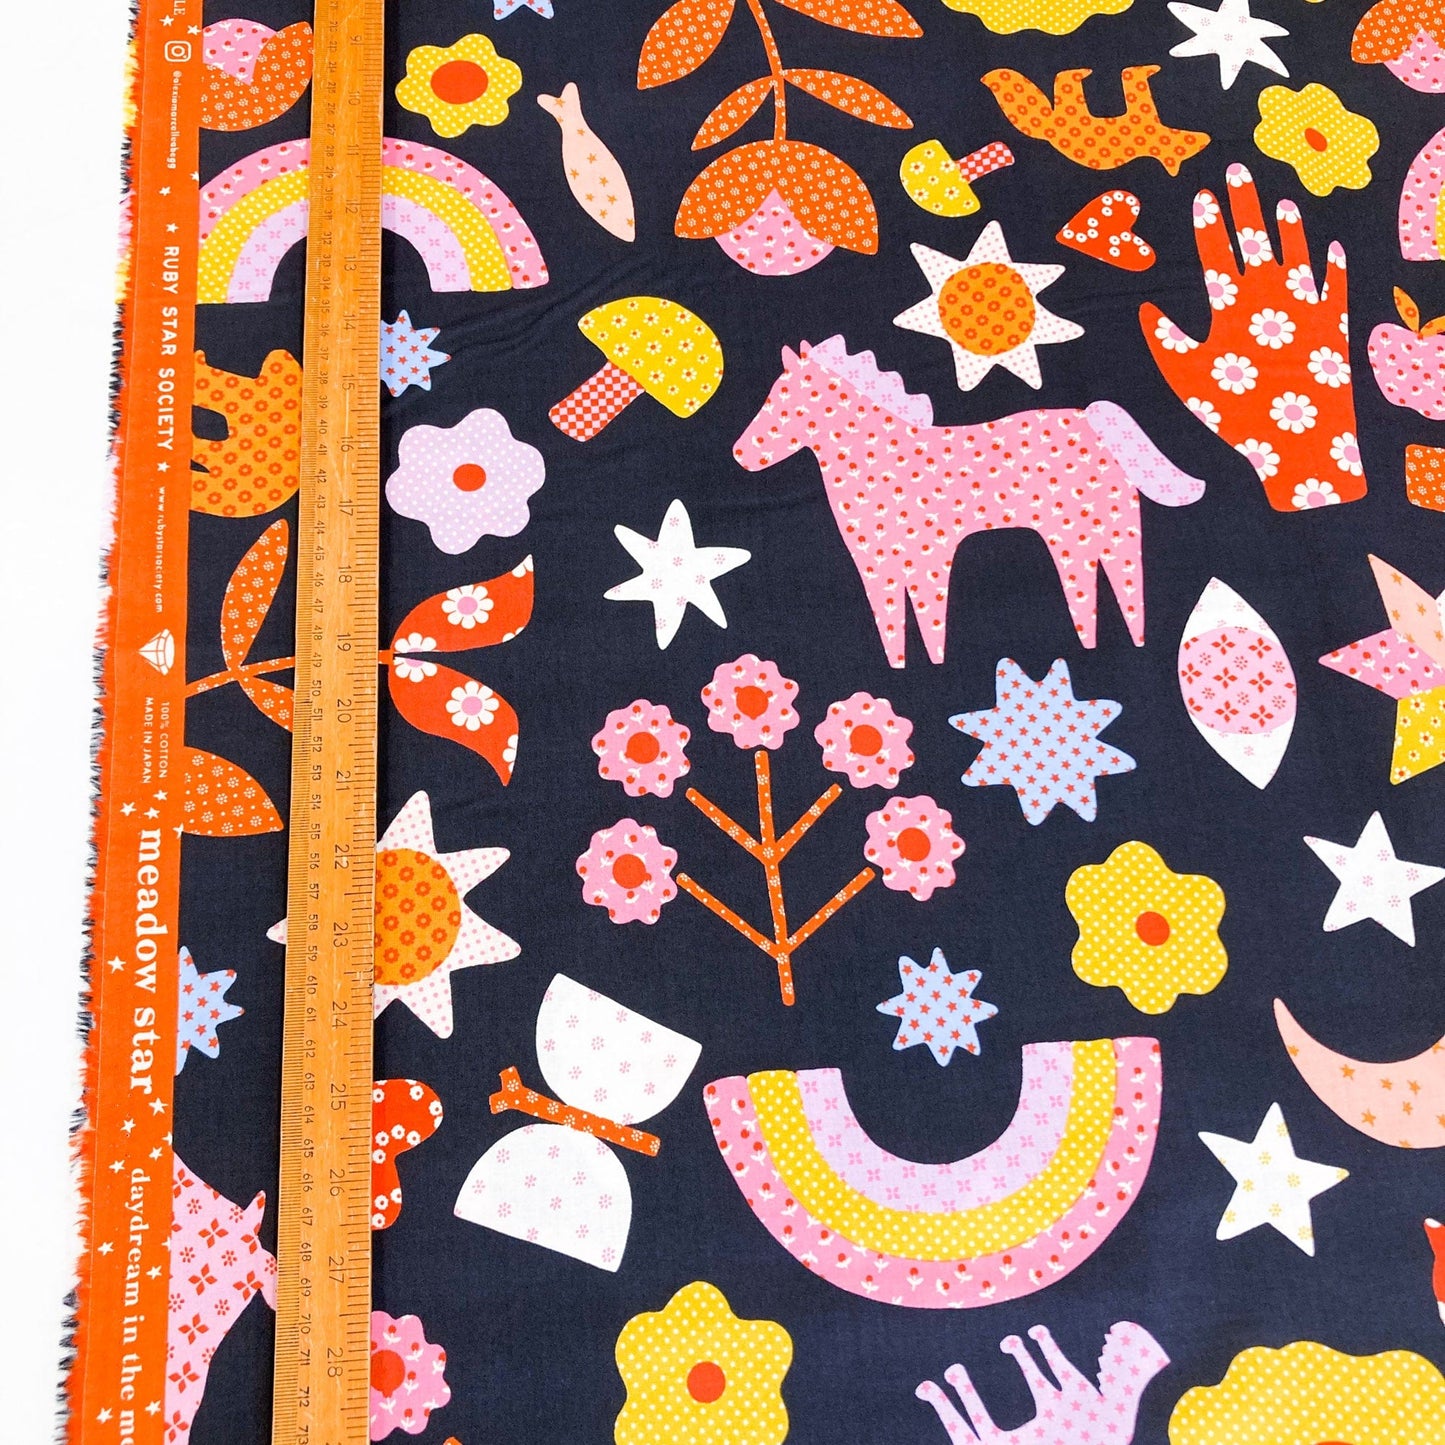 Ruby Star Society 'Meadow Star' Quilting Cotton 'Appliqué' in 'Soft Black'